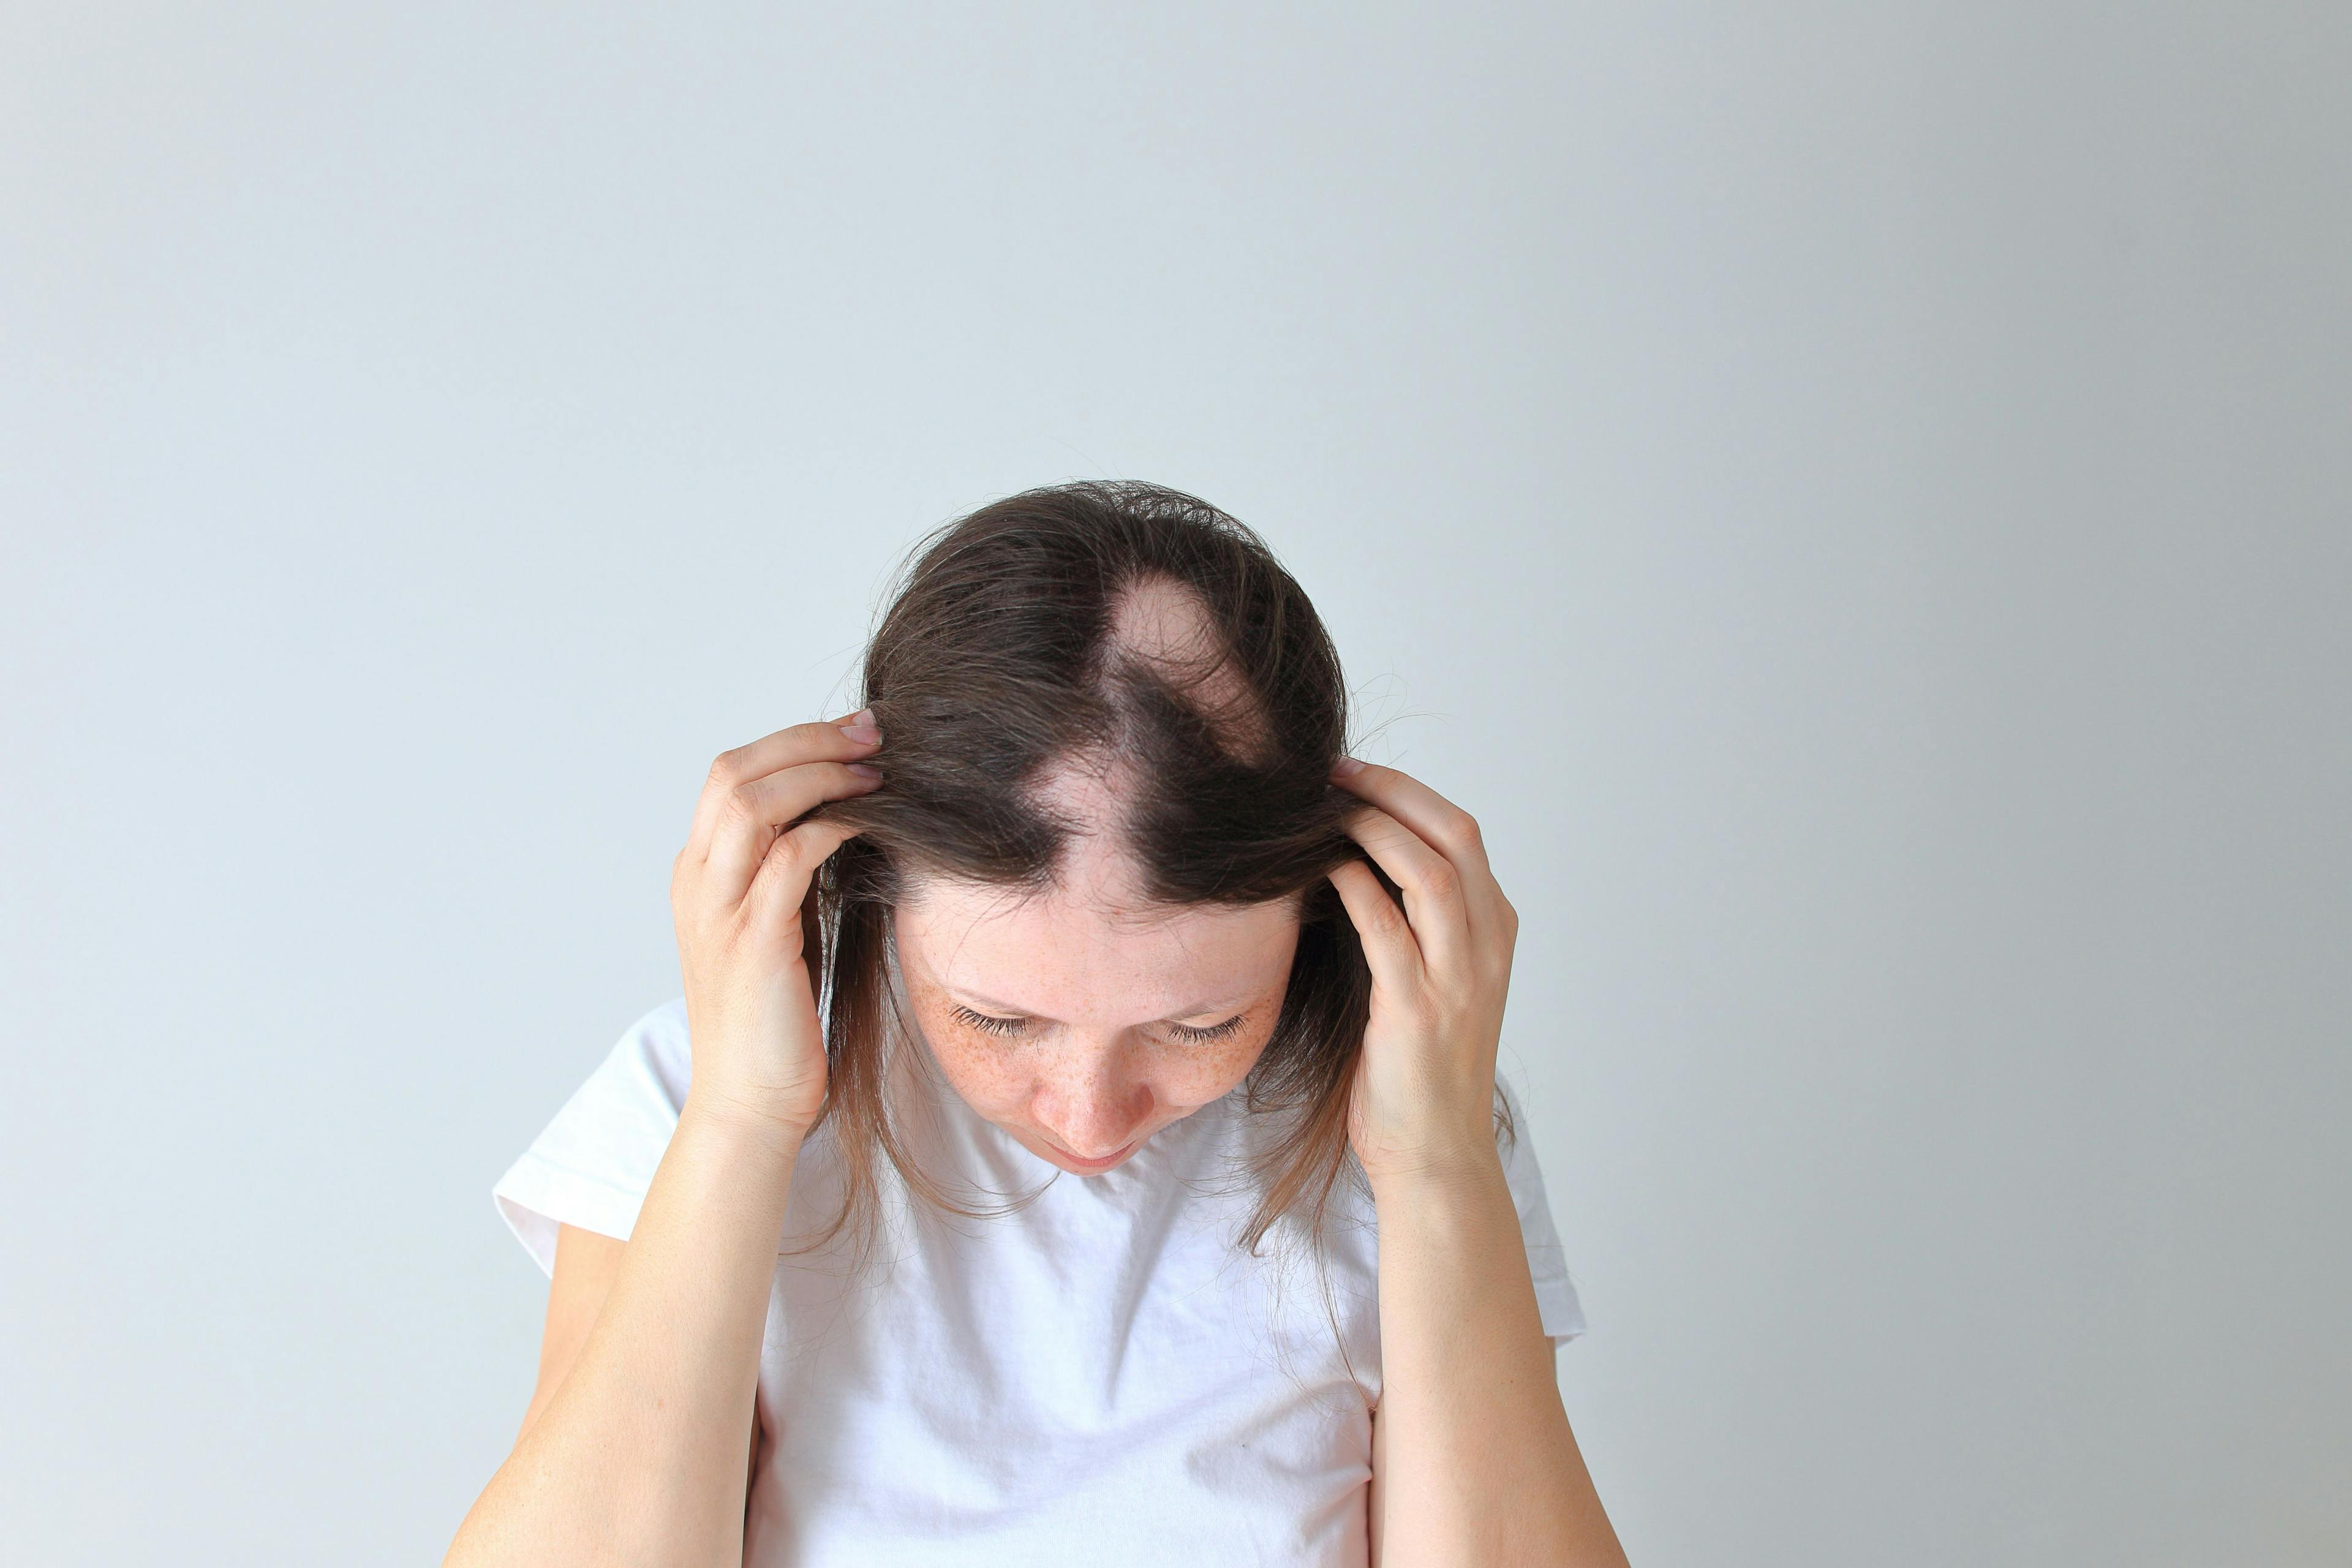 Anxiety and Depression Prevalent in Patients With Alopecia